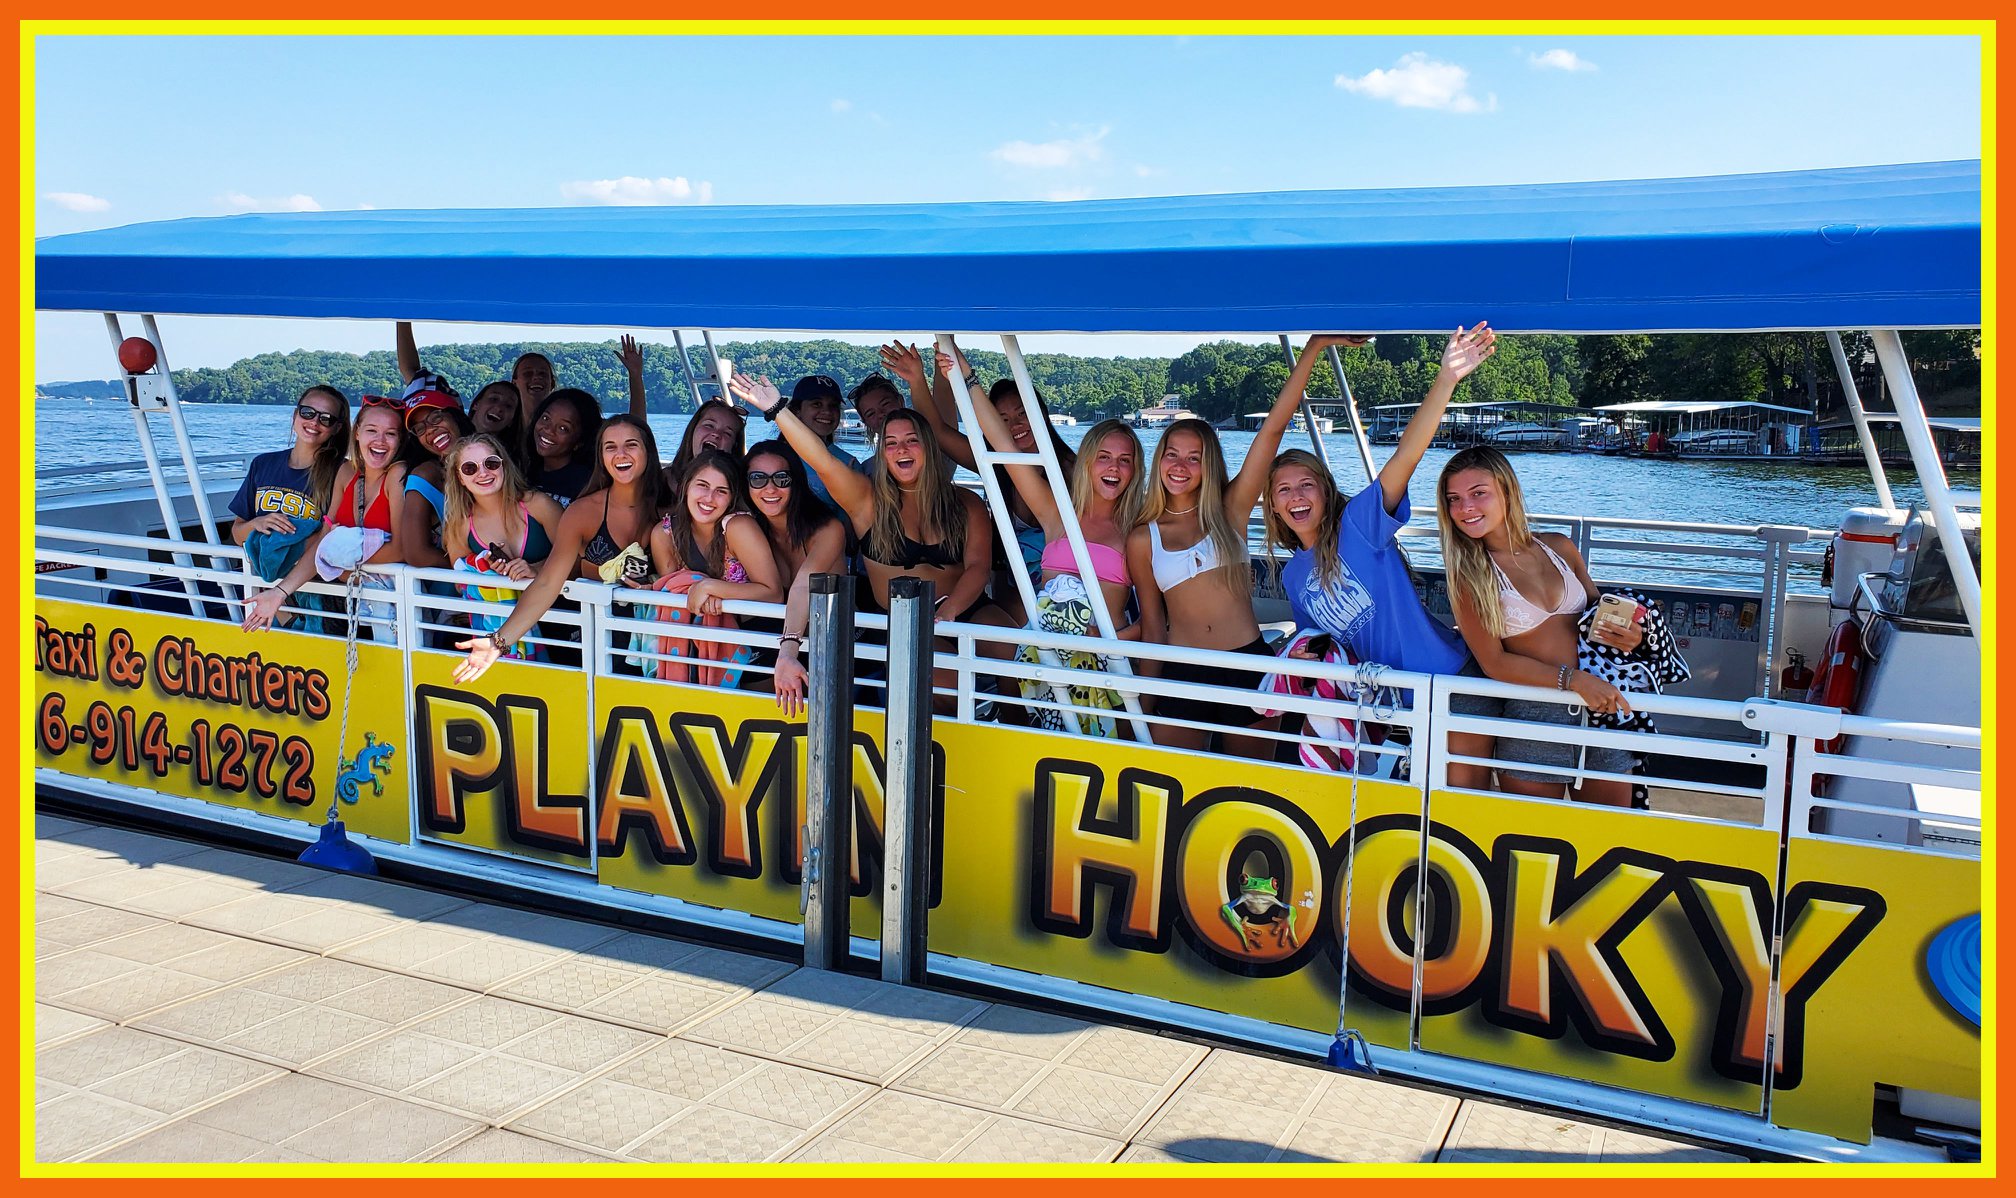 A group of young women aboard a Playin Hooky boat, enjoying a Lake of the Ozarks cruise.